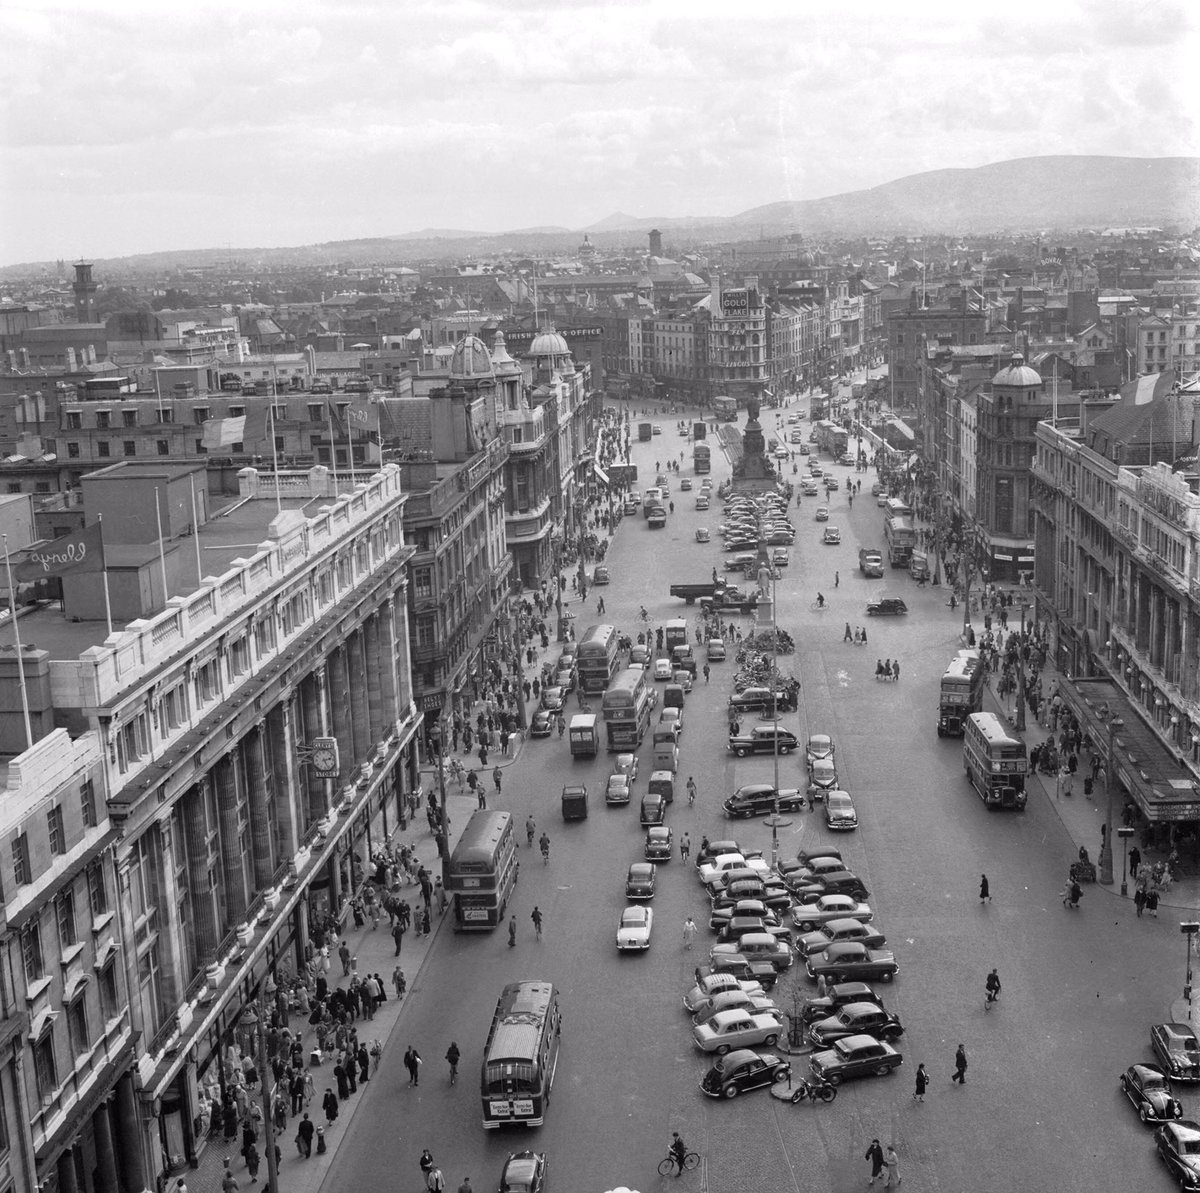 So I came across a link to the Harrison-Forman collection of photography at the University of Wisconsin which includes photos of Ireland. I’ve found a number of fascinating ones from the 1950s-70s - let’s take a look.